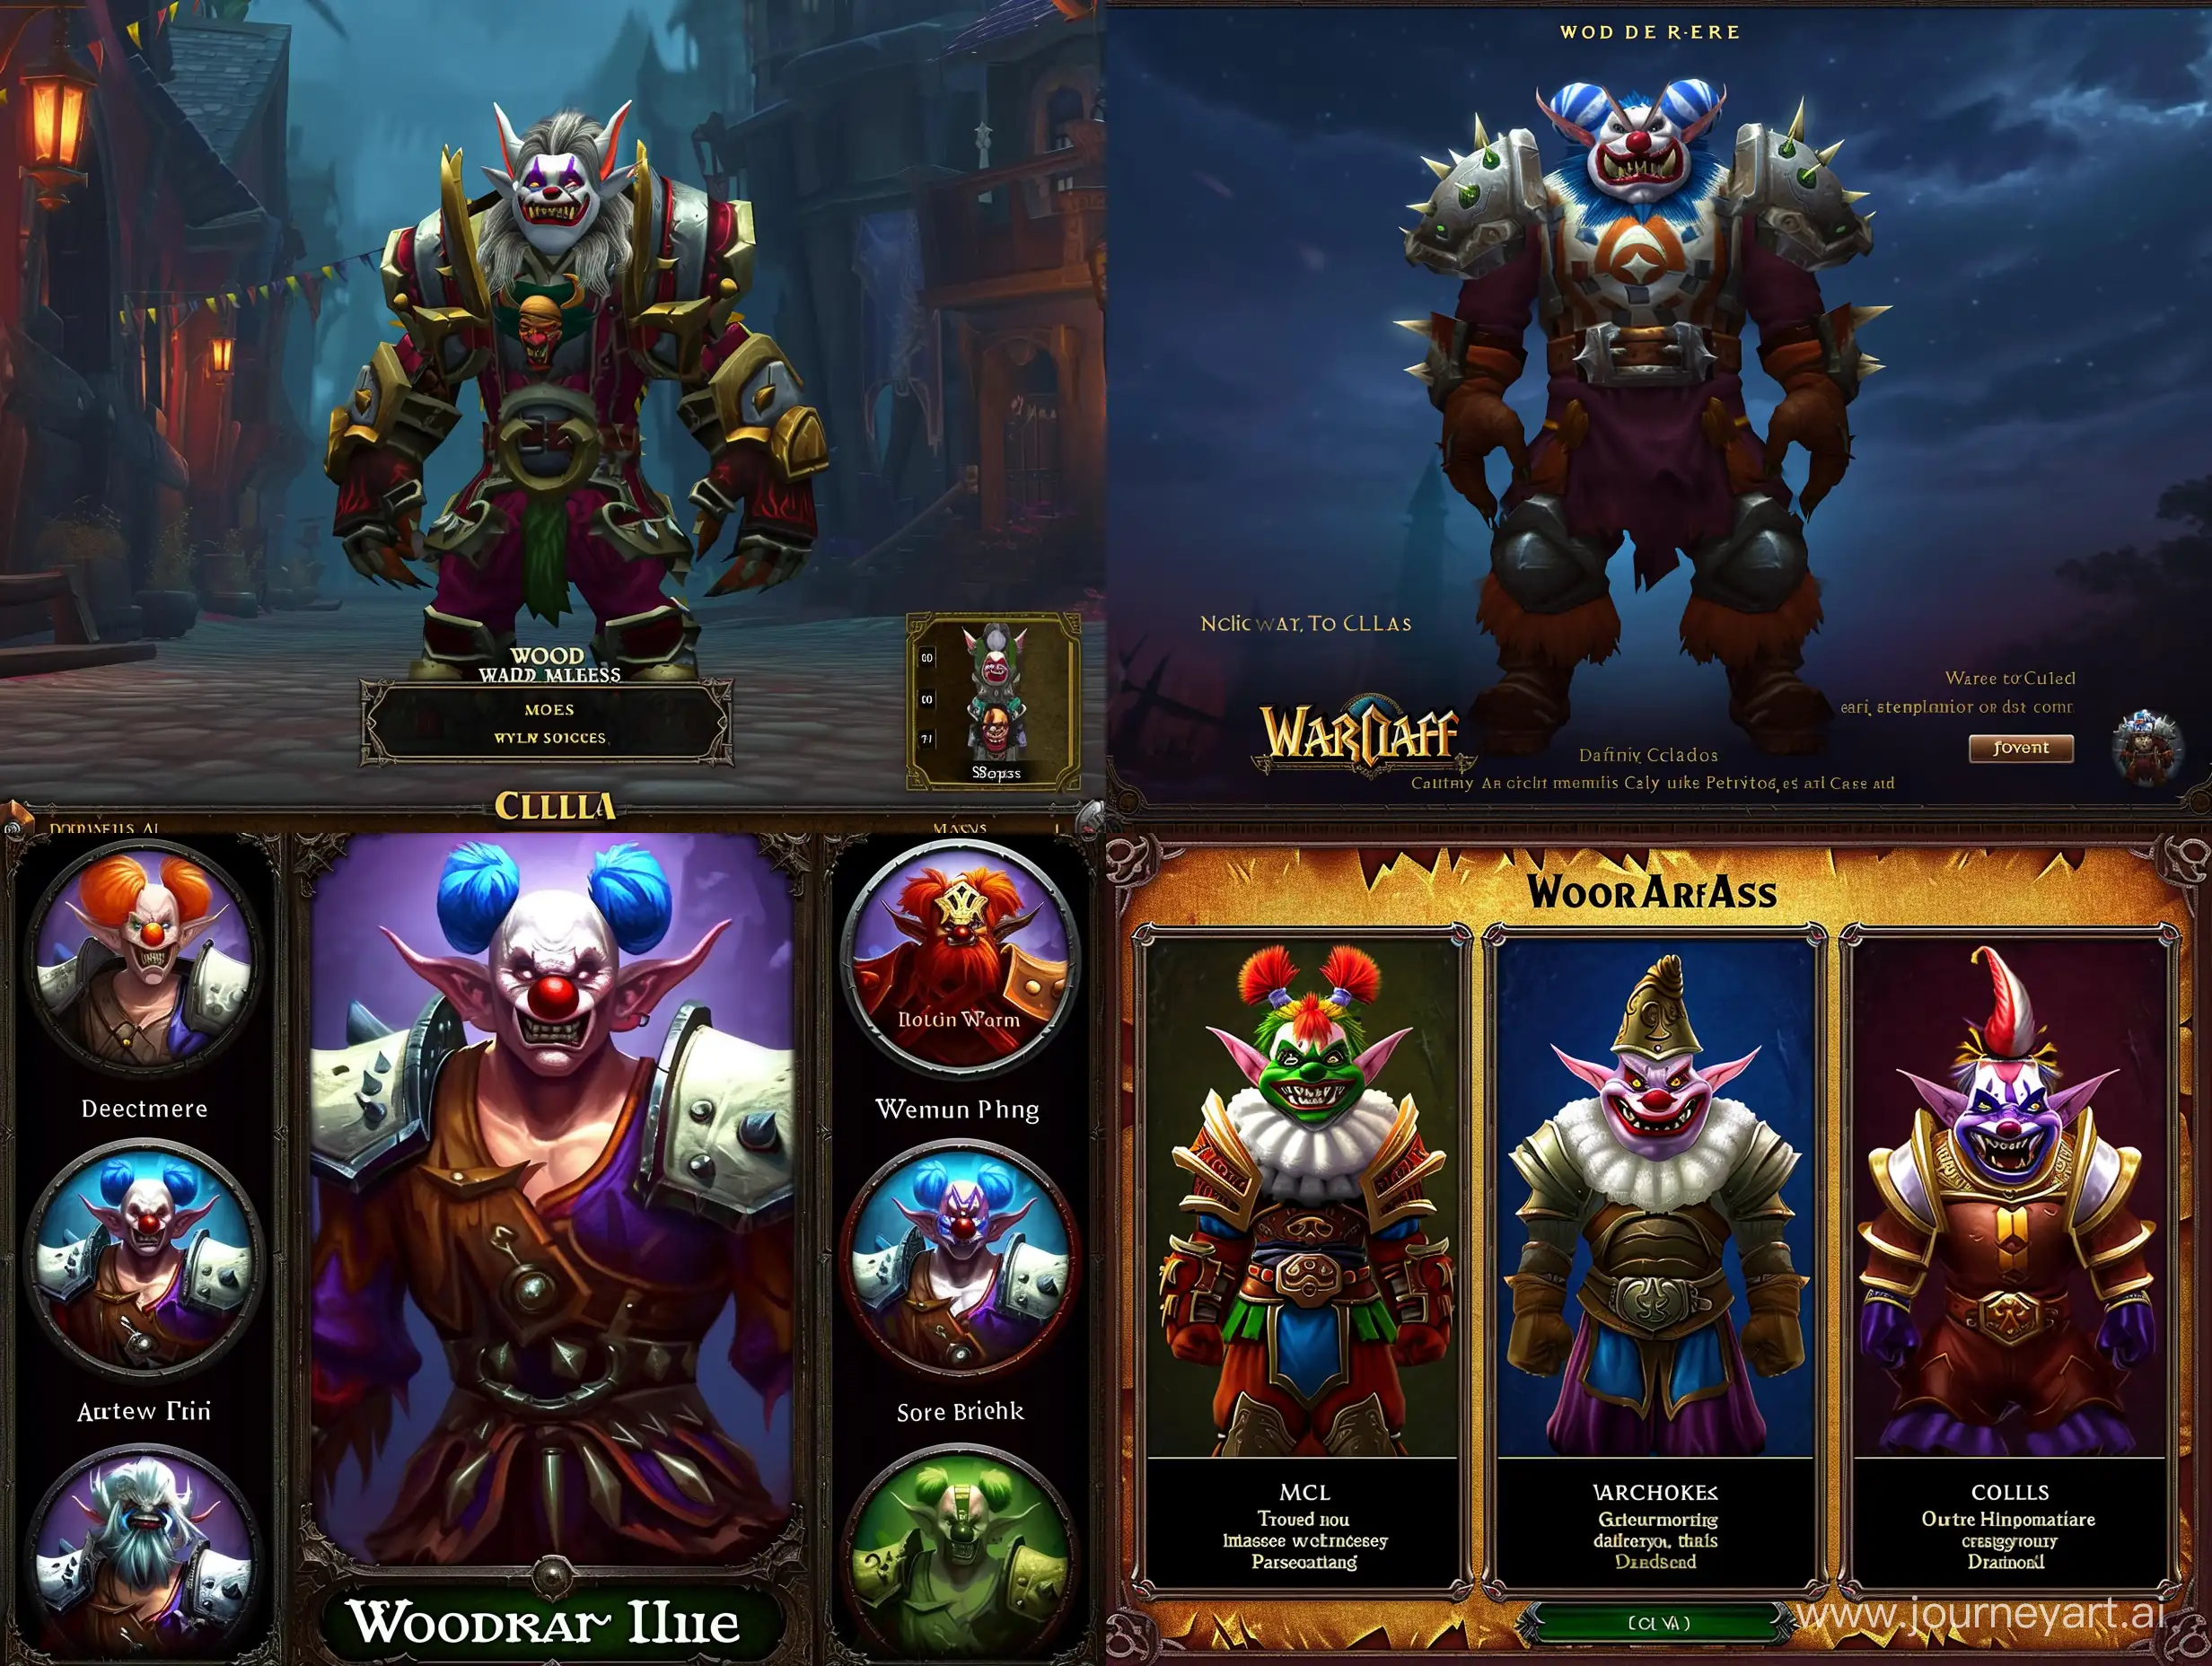 Night-Elf-Clown-in-Heavy-Plate-Armor-World-of-Warcraft-Character-Selection